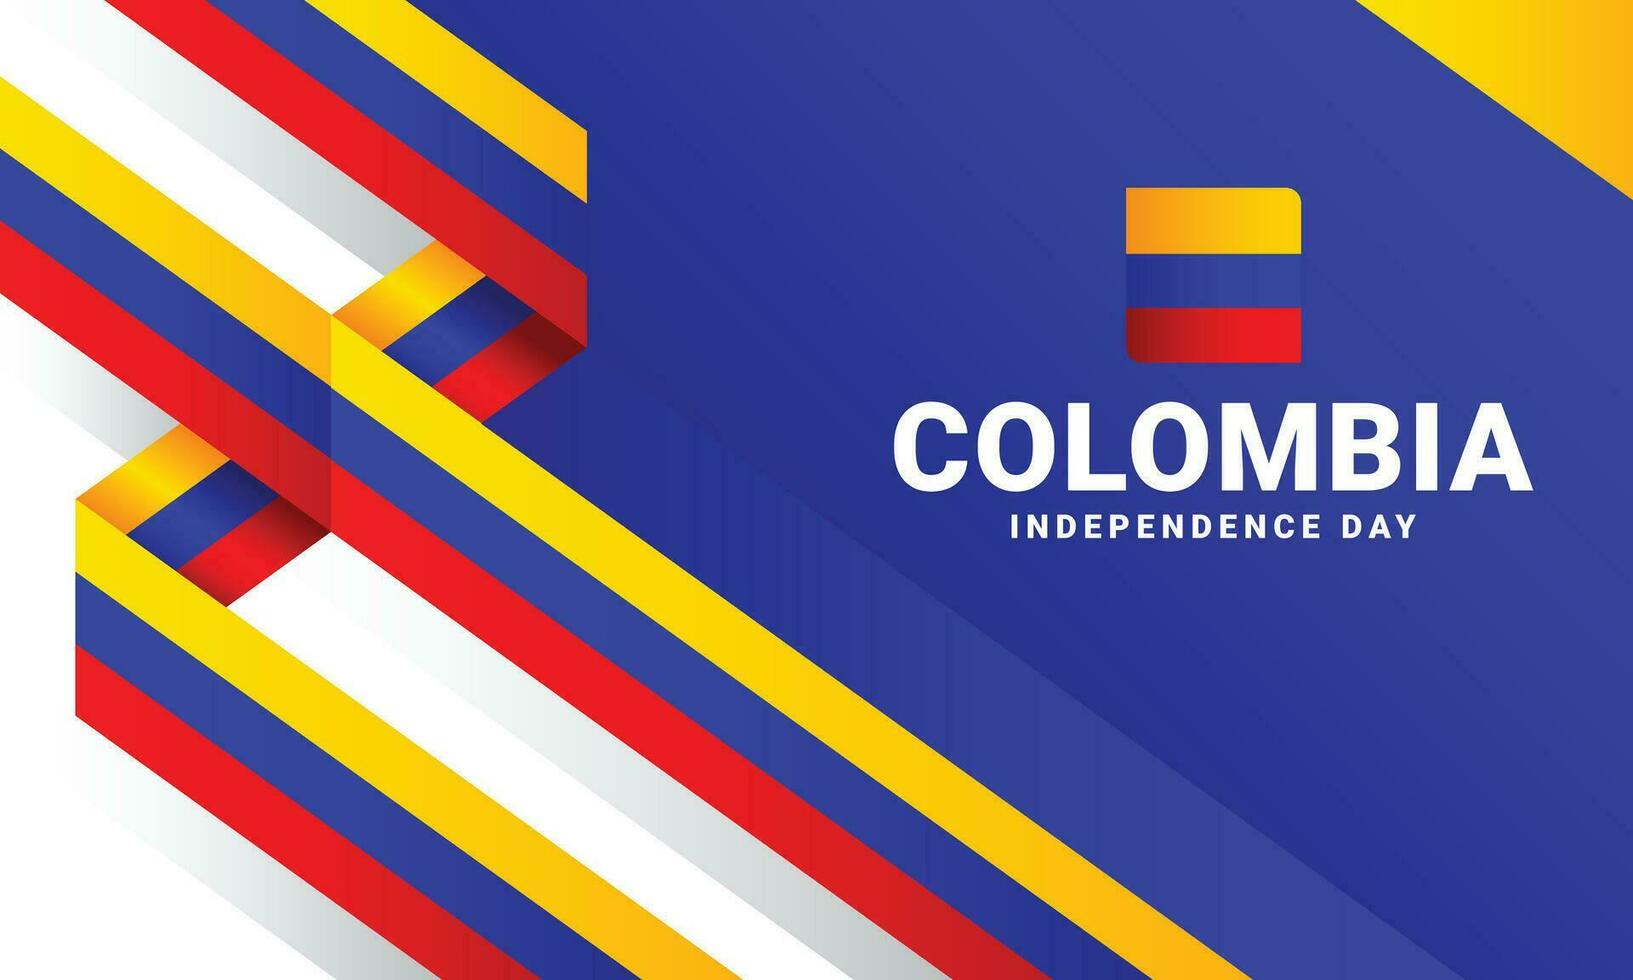 Colombia Independence day event celebrate background vector